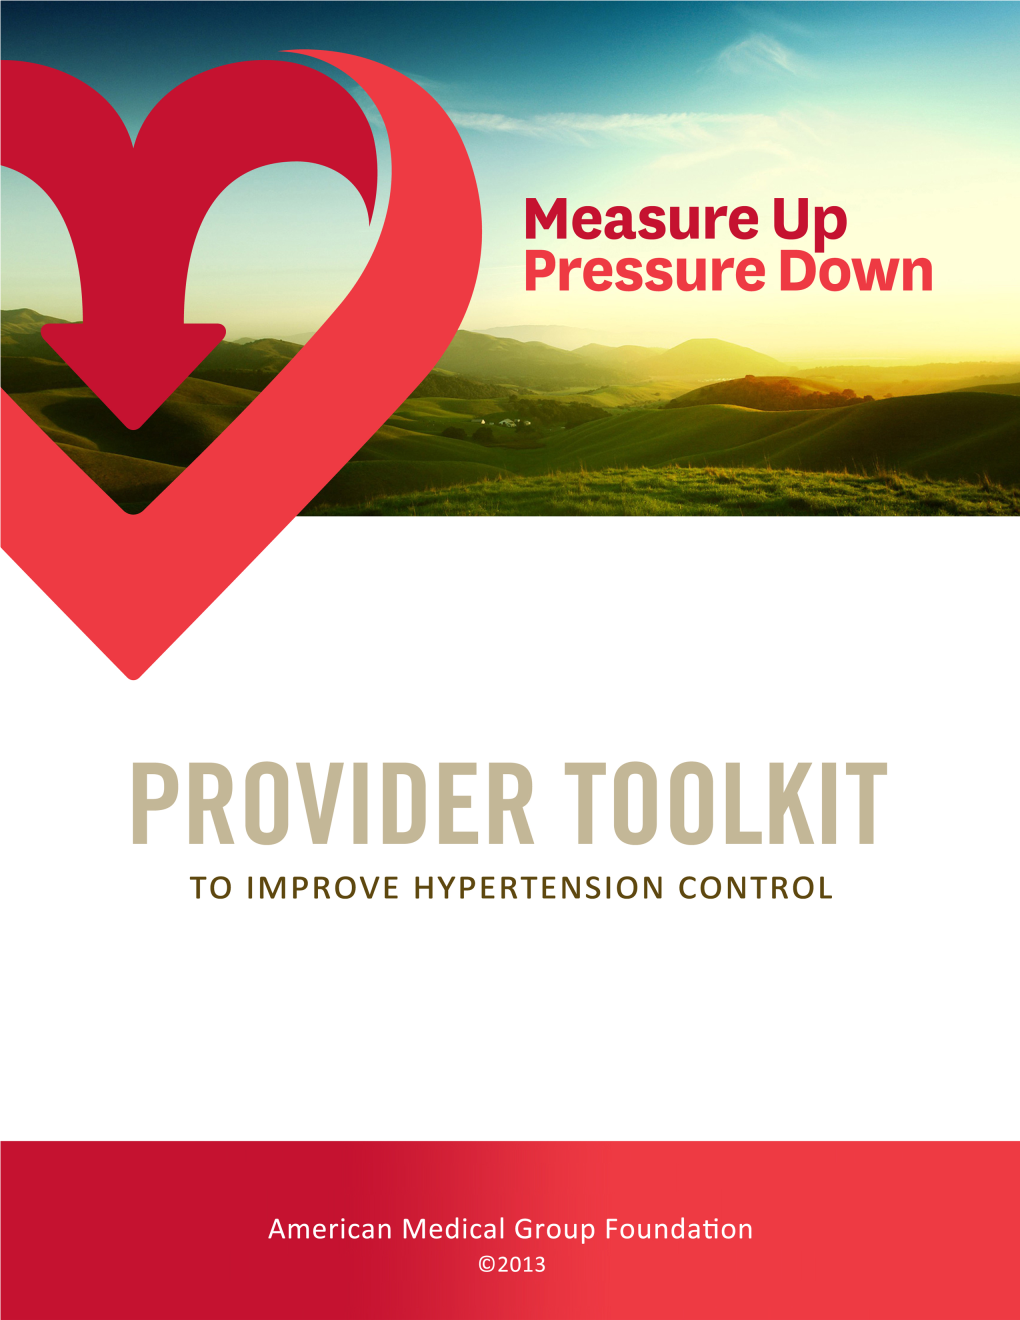 Provider Toolkit As Part of Our Measure Up/Pressure Down Three-Year National Campaign